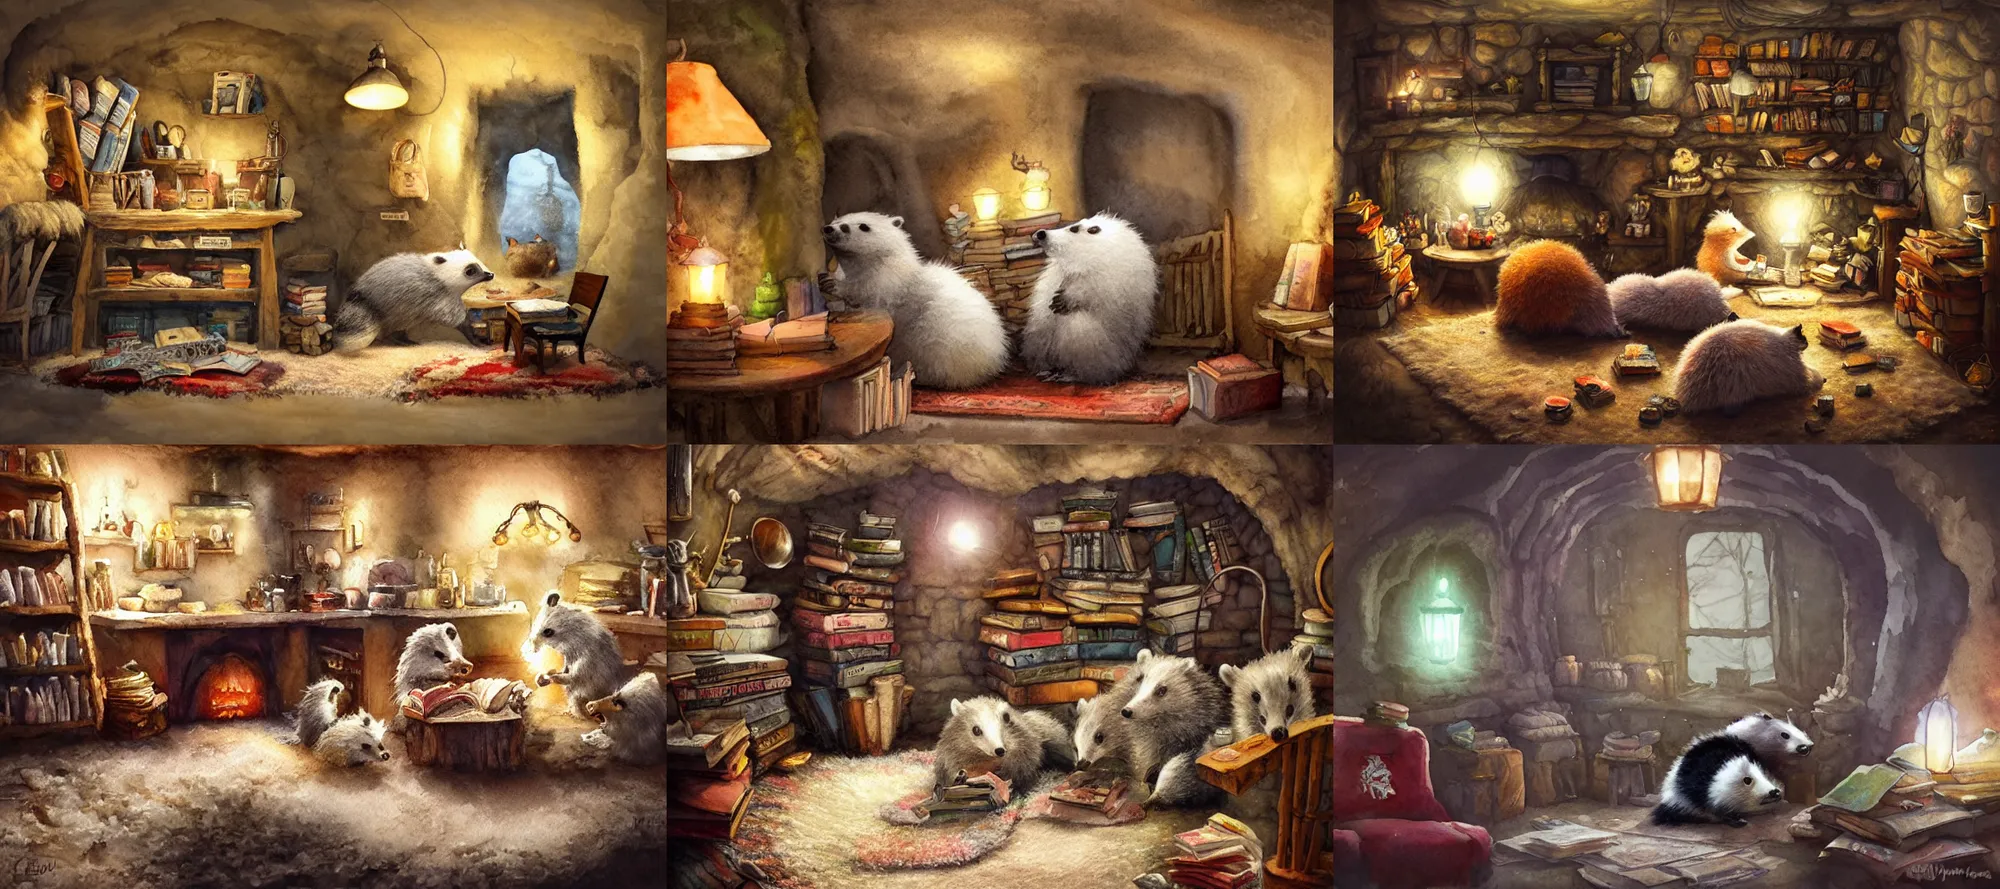 Prompt: watercolor, cute fluffy badgers wearing clothes live underground in a cave, fish eye lens, dark, lantern light, kitchen table, comfy chairs, cosy fireplace, stack of books on side table, colorful rug on floor by fireplace, family framed on the wall, soft, cosy, craig mullins, justin sweet